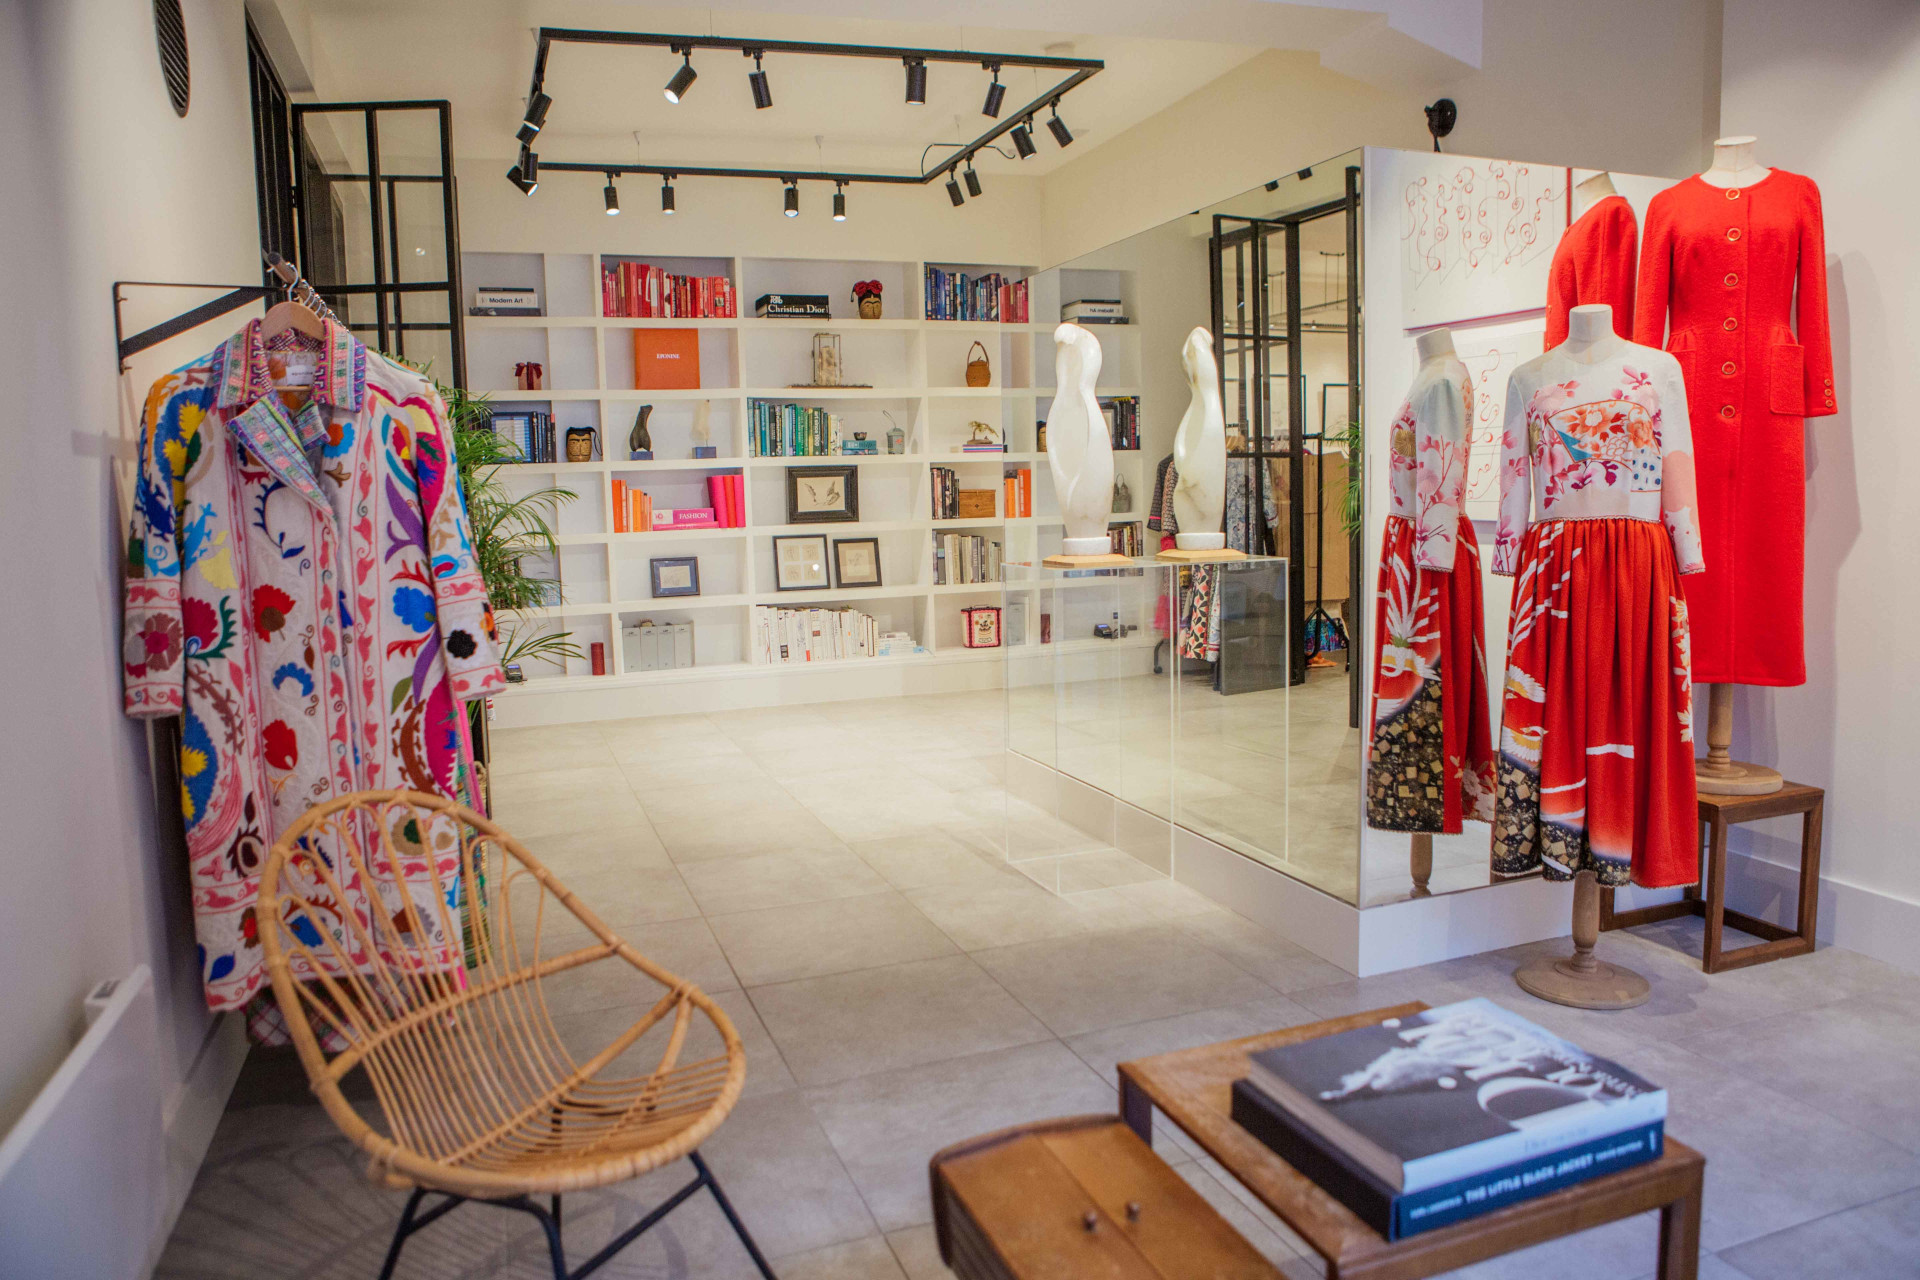 Shop interior with dresses and artworks